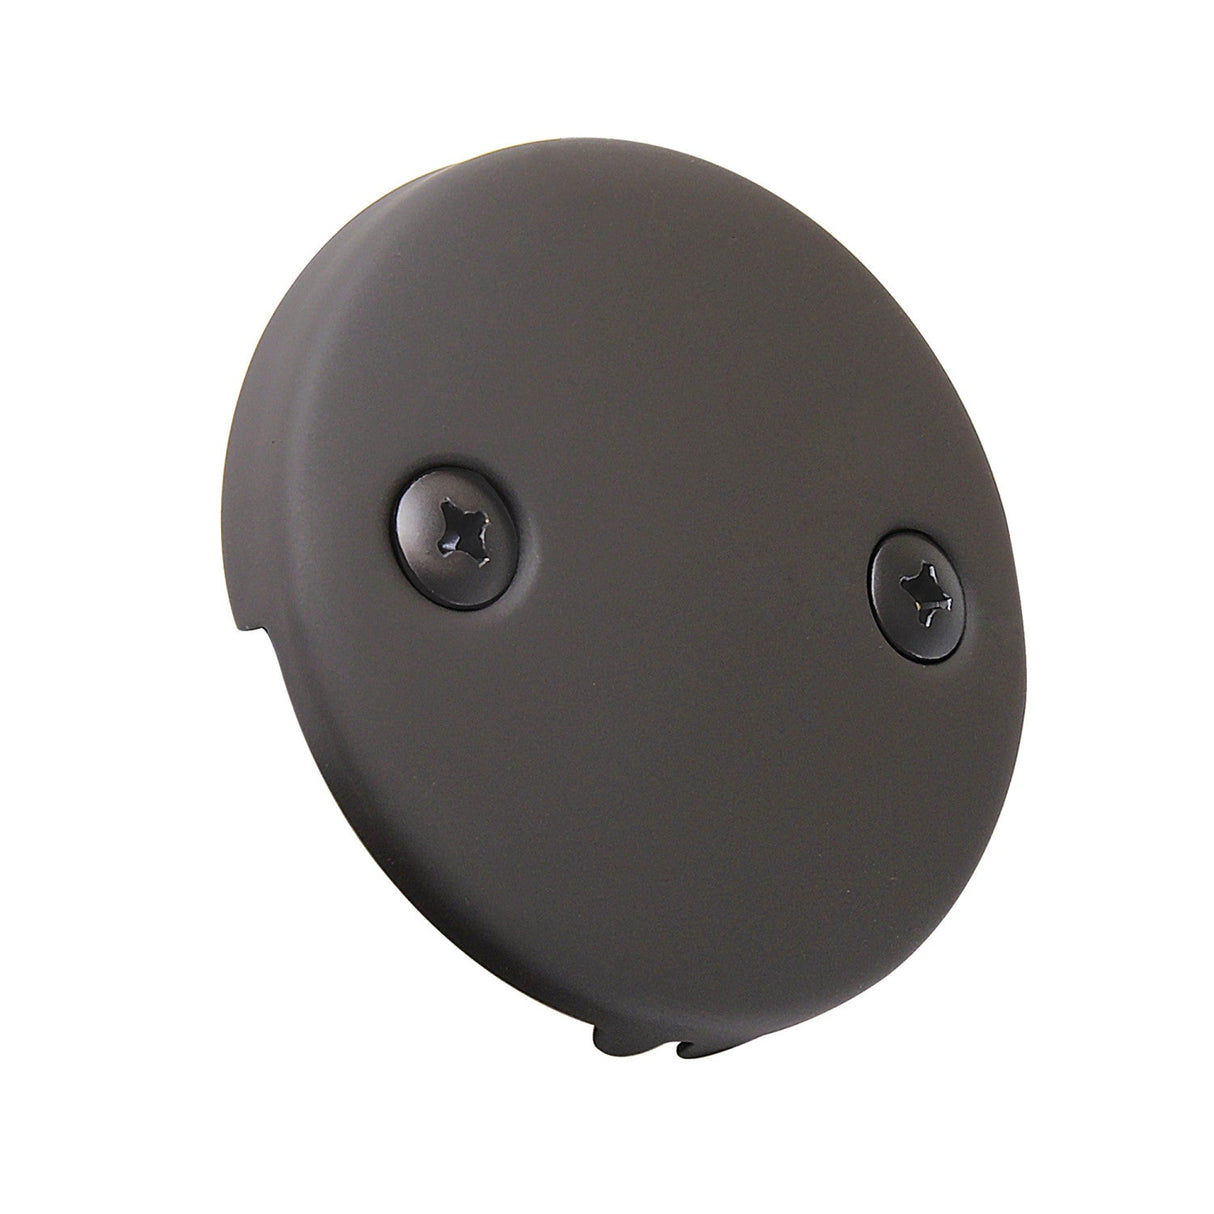 Made To Match DTT105 Round Bathtub Overflow Plate, Oil Rubbed Bronze